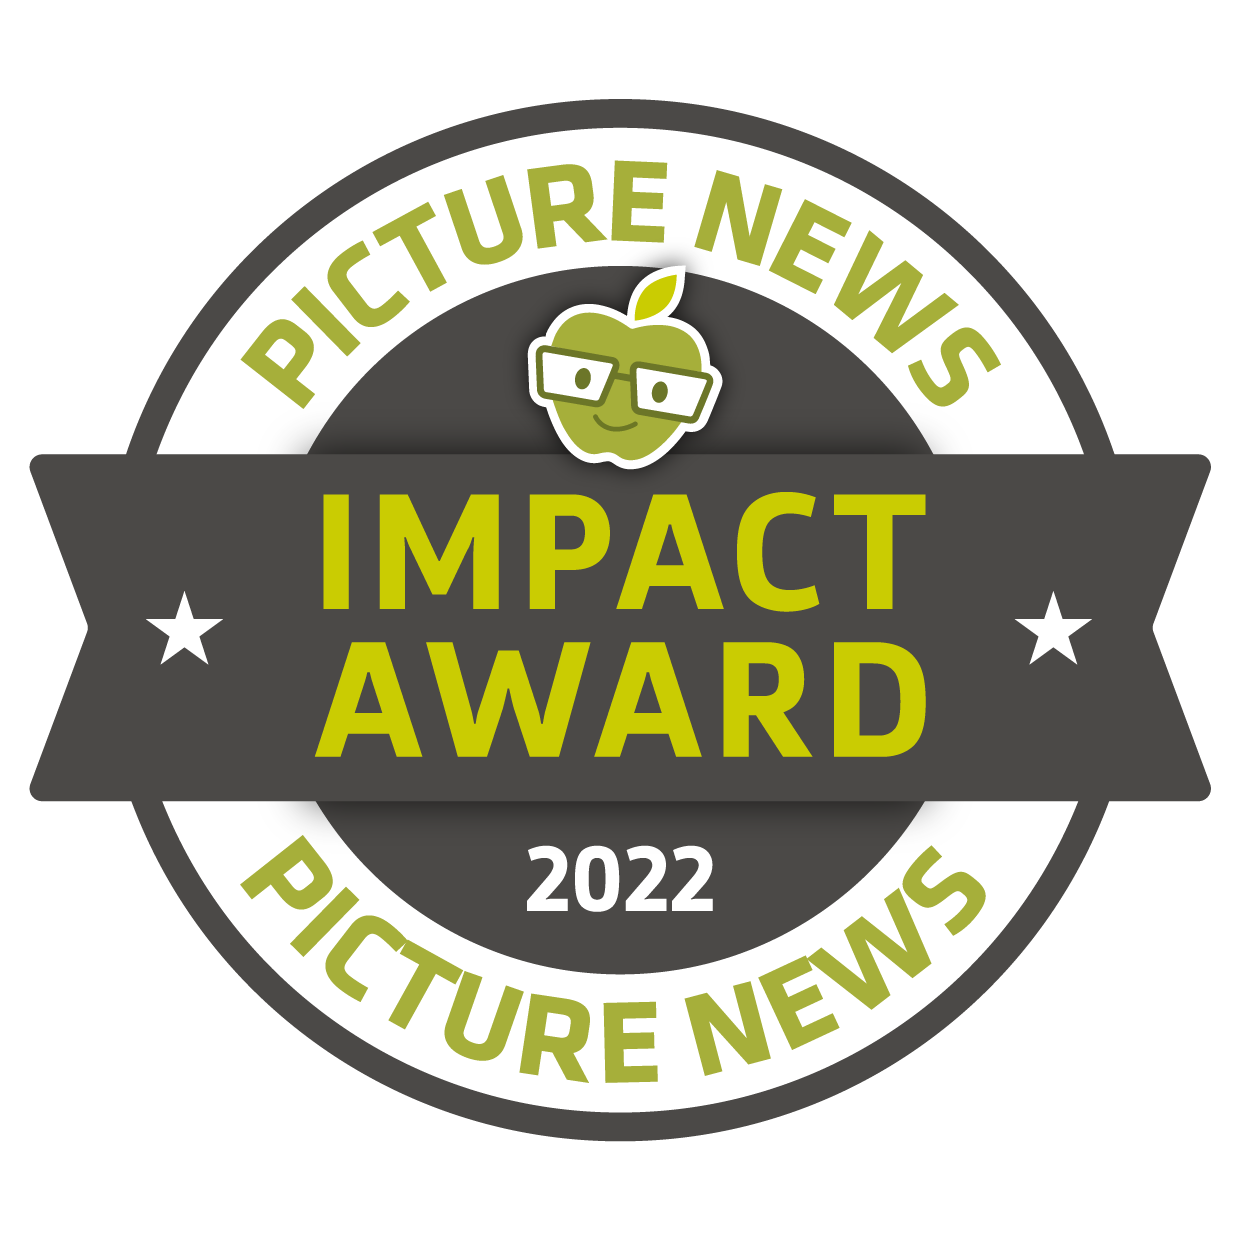 Picture News Award 2022